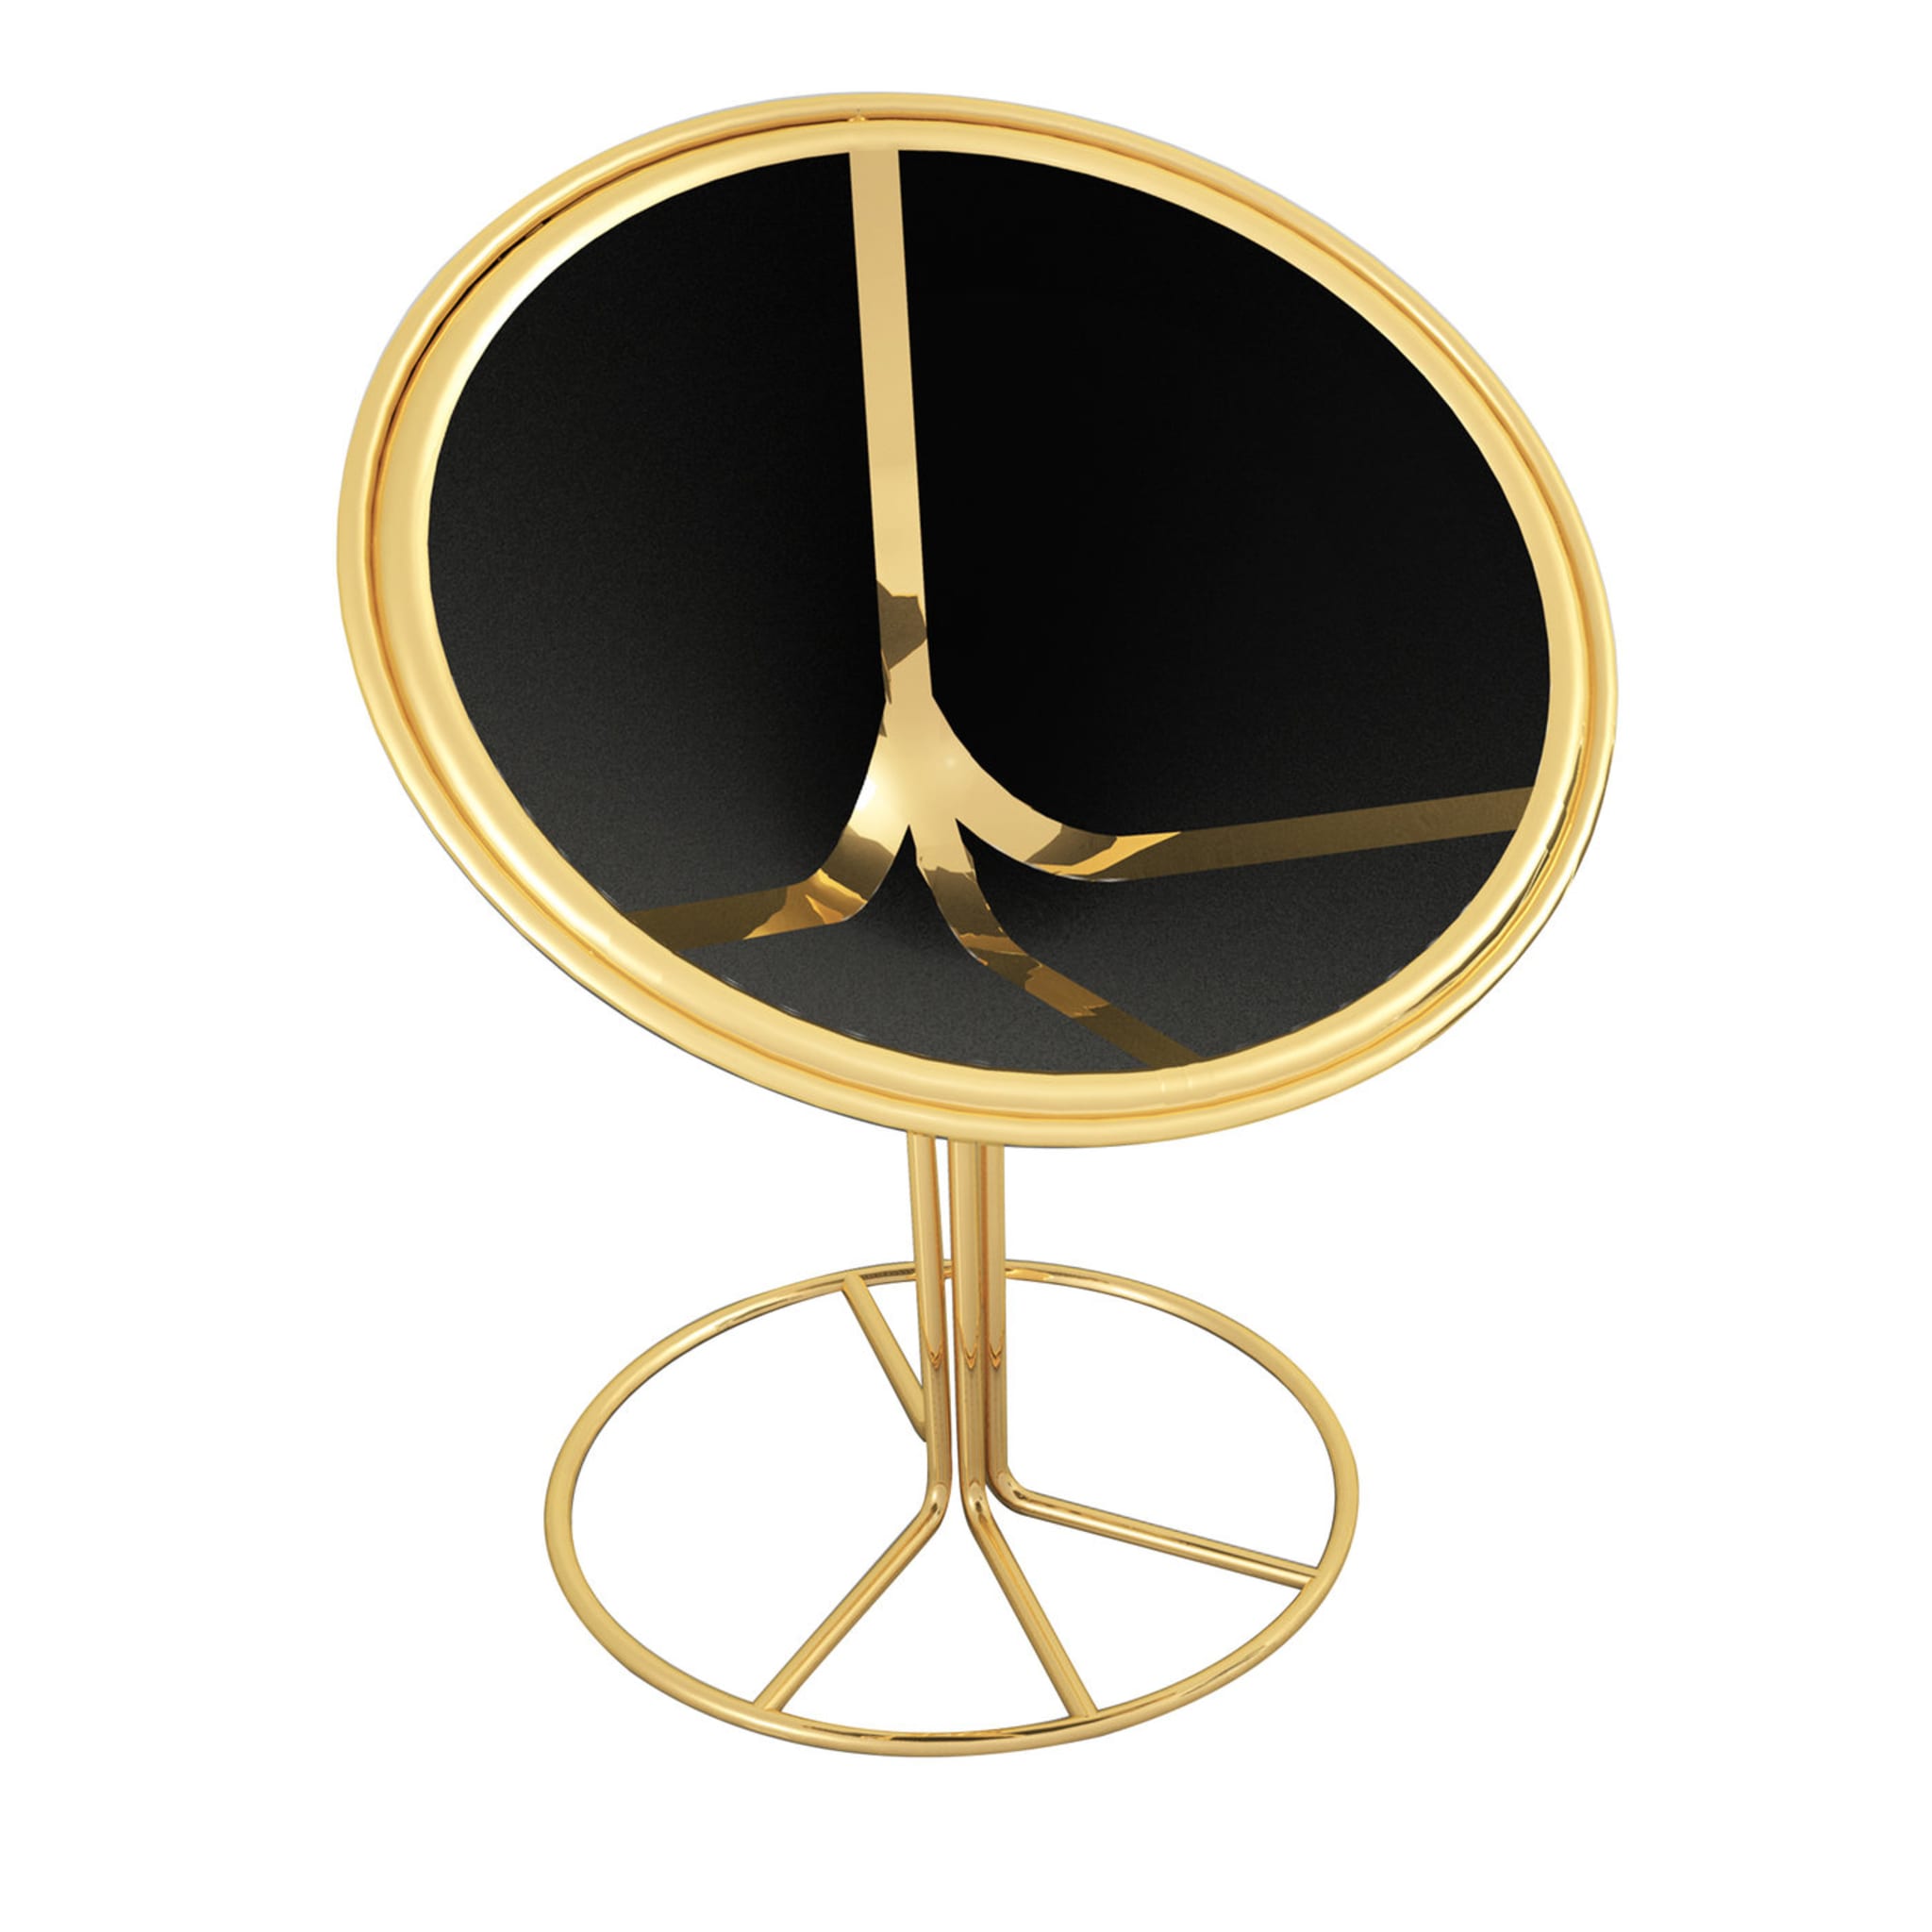 Pace Black and Gold Chair by Garilab by Piter Perbellini - Main view